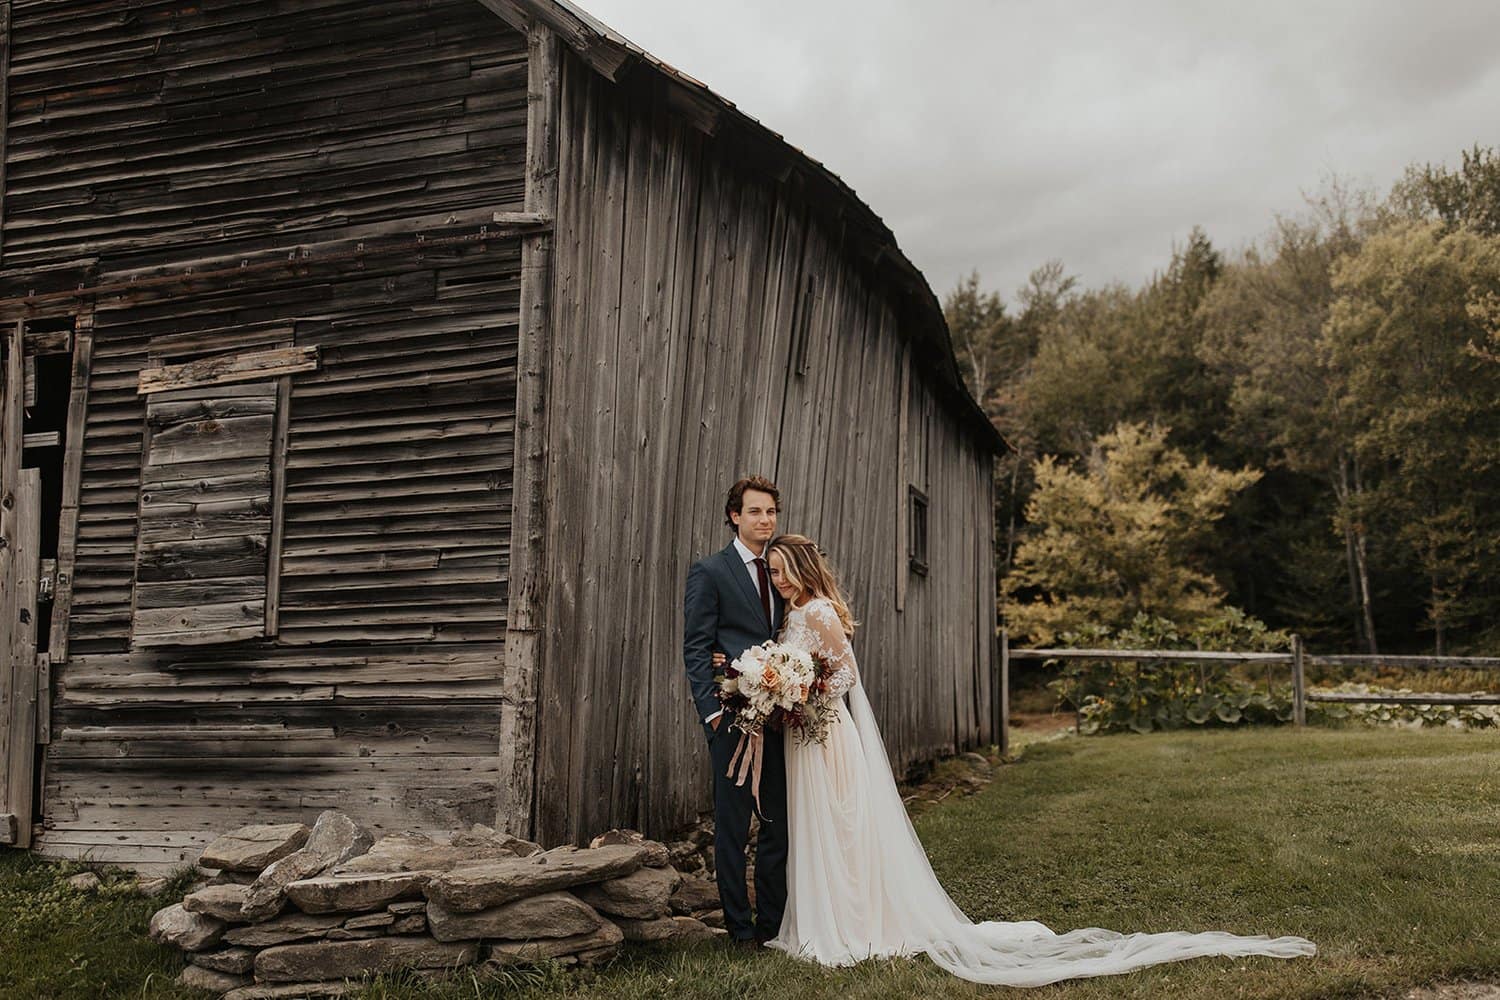 Bride and groom at romantic outdoor fall barn holding a modern September bridal bouquet of garden roses, hanging amaranth, sweet peas, dahlias, cosmos and zinnias by Nectar and Root, Vermont wedding florist at Edson Hill in Stowe, Vermont.